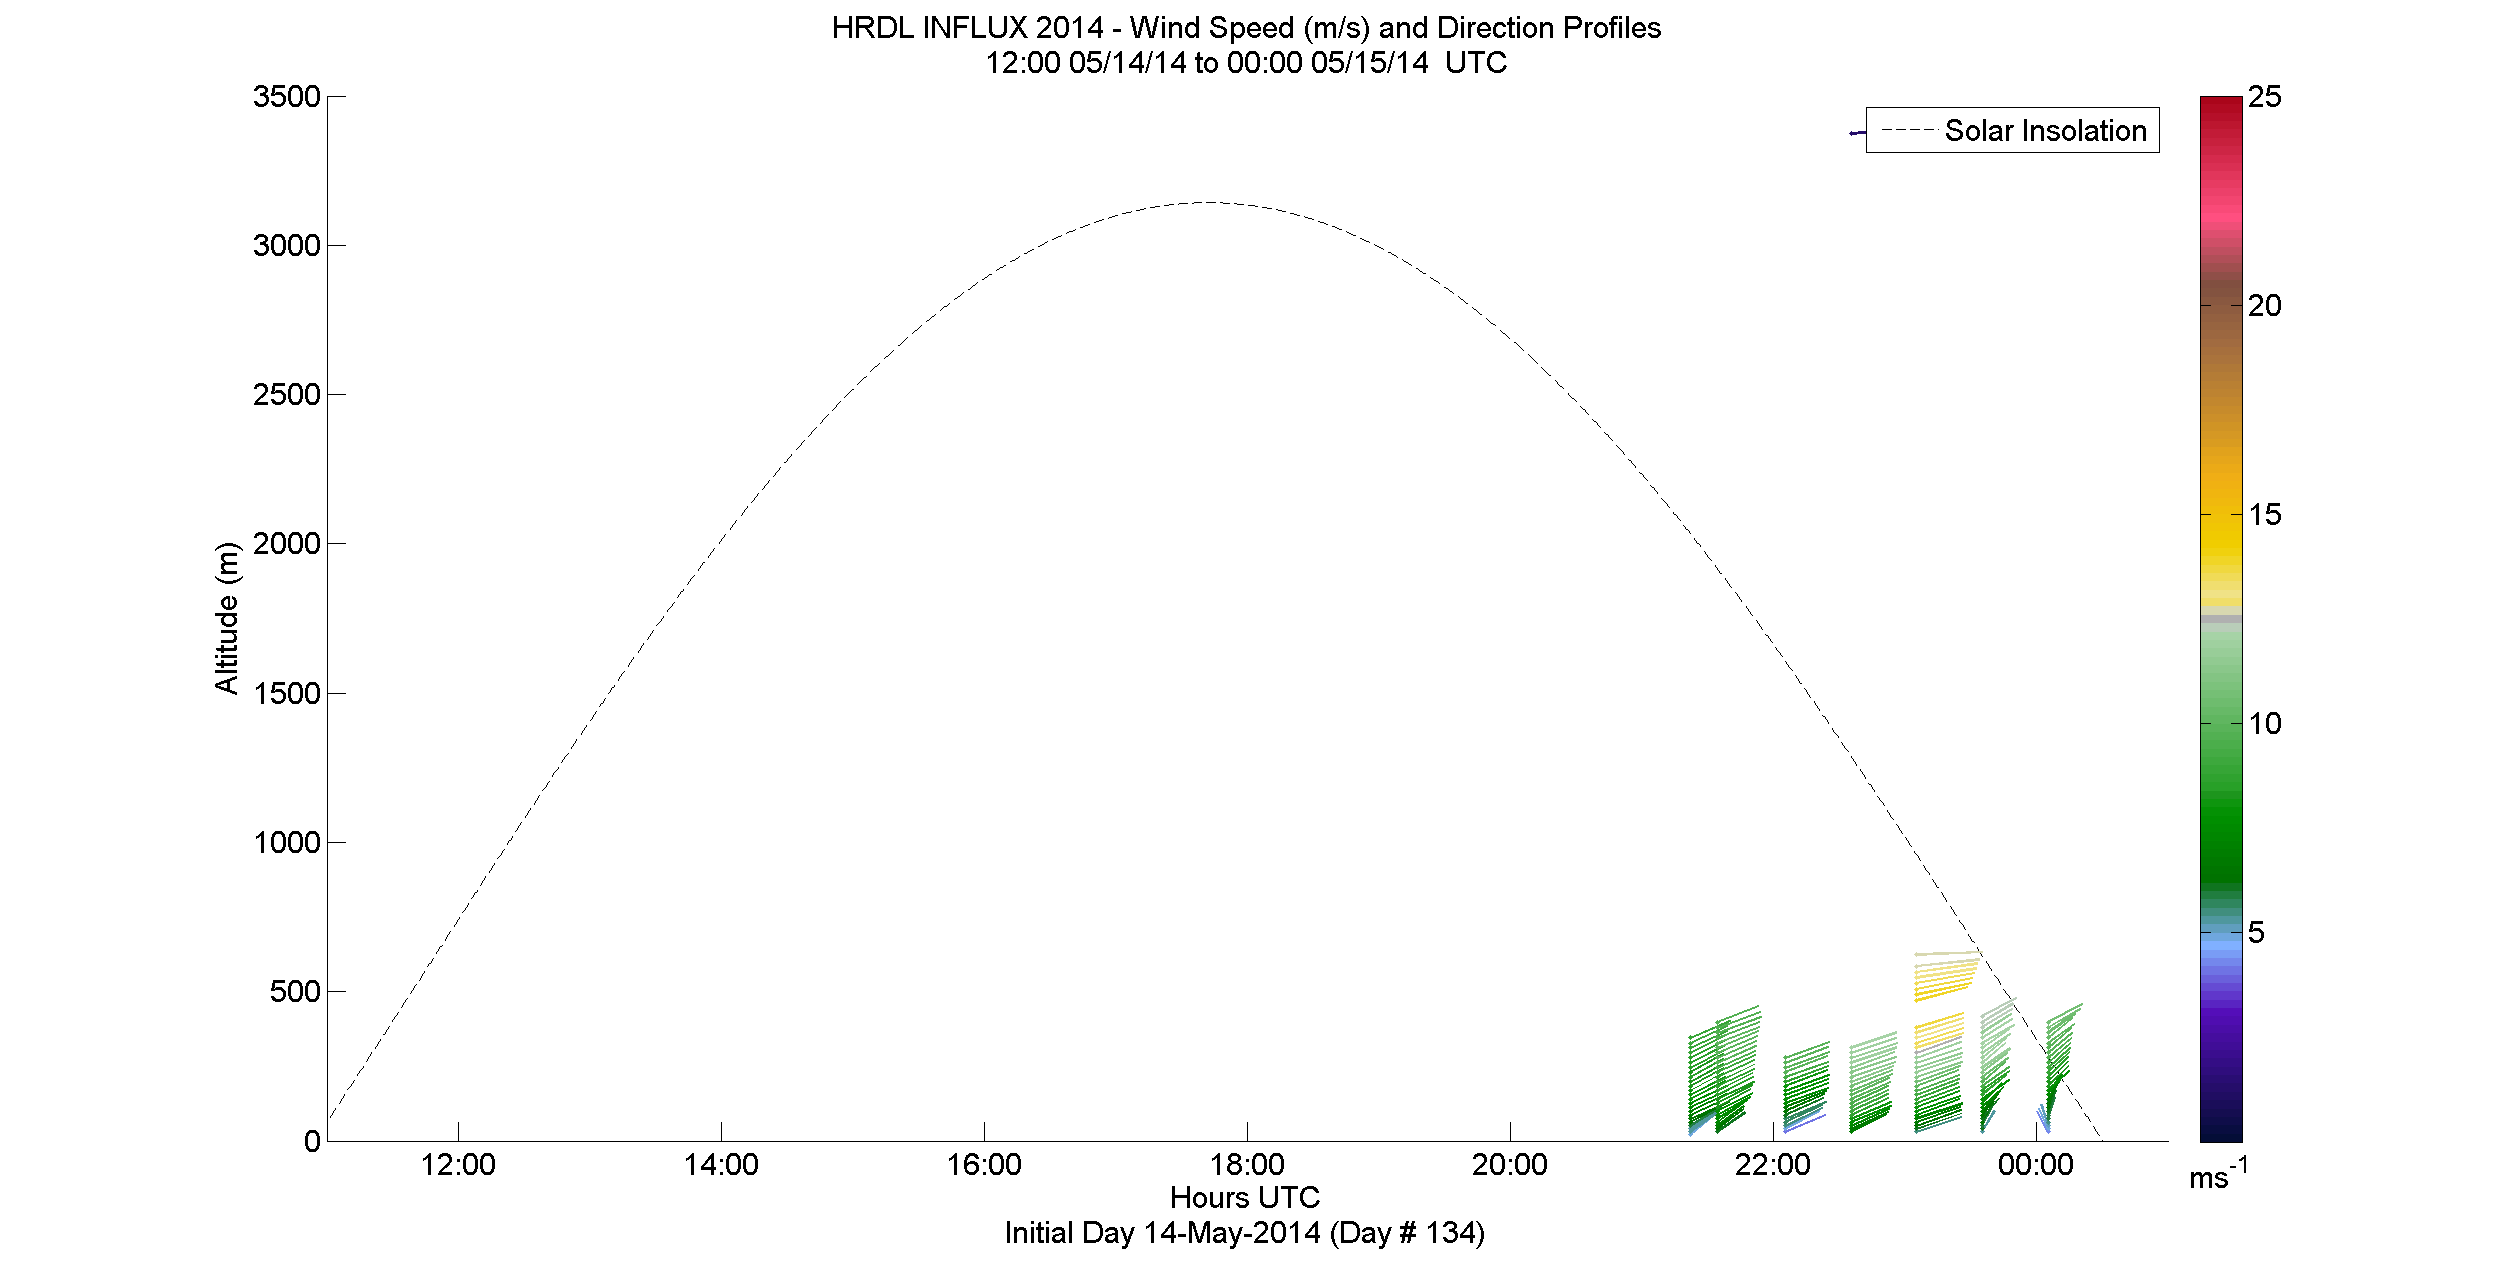 HRDL speed and direction profile - May 14 pm